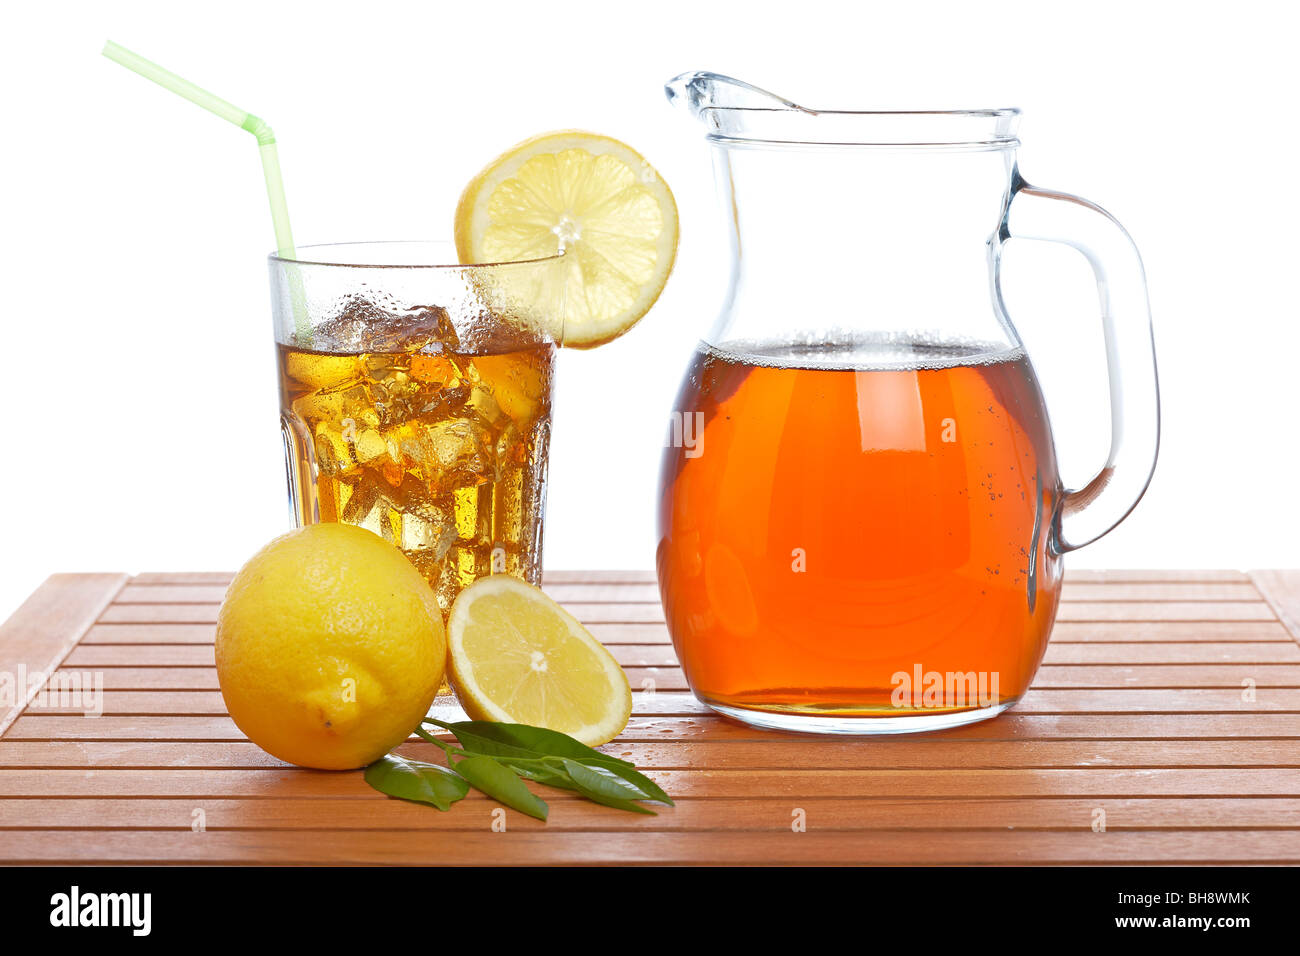 Ice tea pitcher and tumbler with lemon and icecubes on wooden background Stock Photo